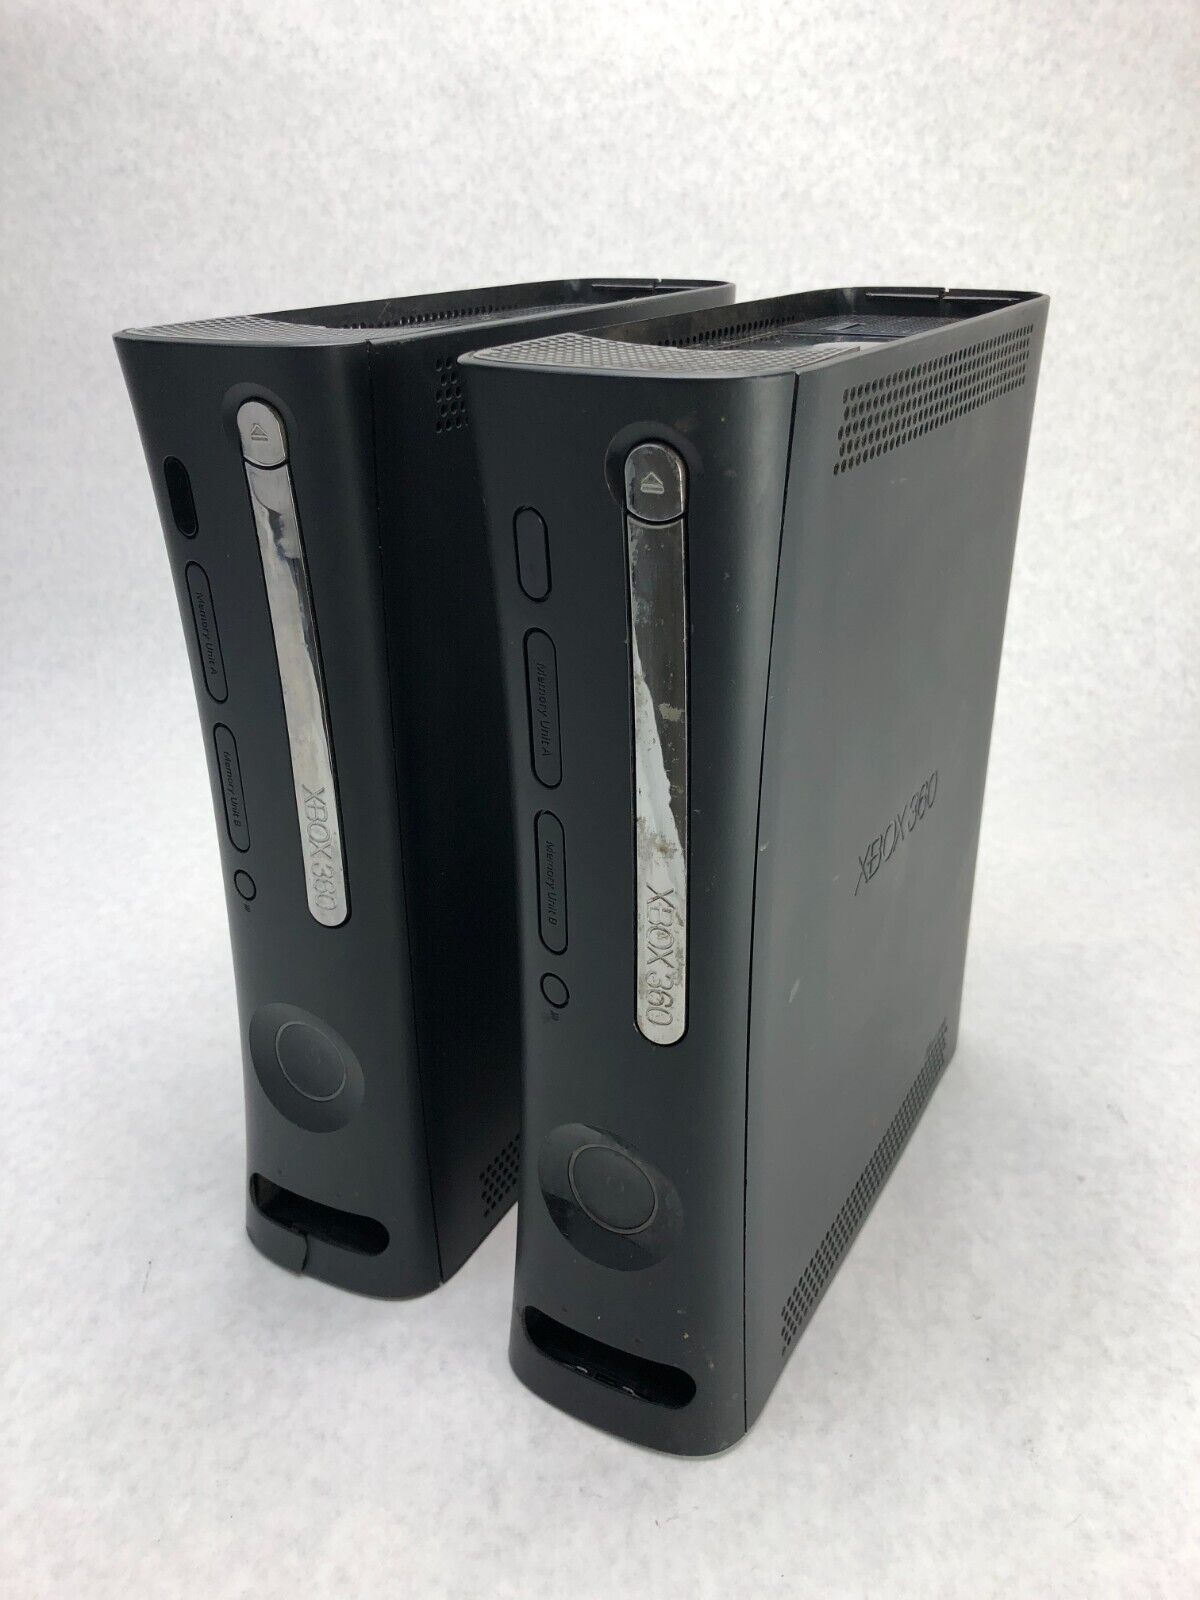 Lot of 2 Microsoft Xbox 360 Black Console Only - Bad Disc Drives